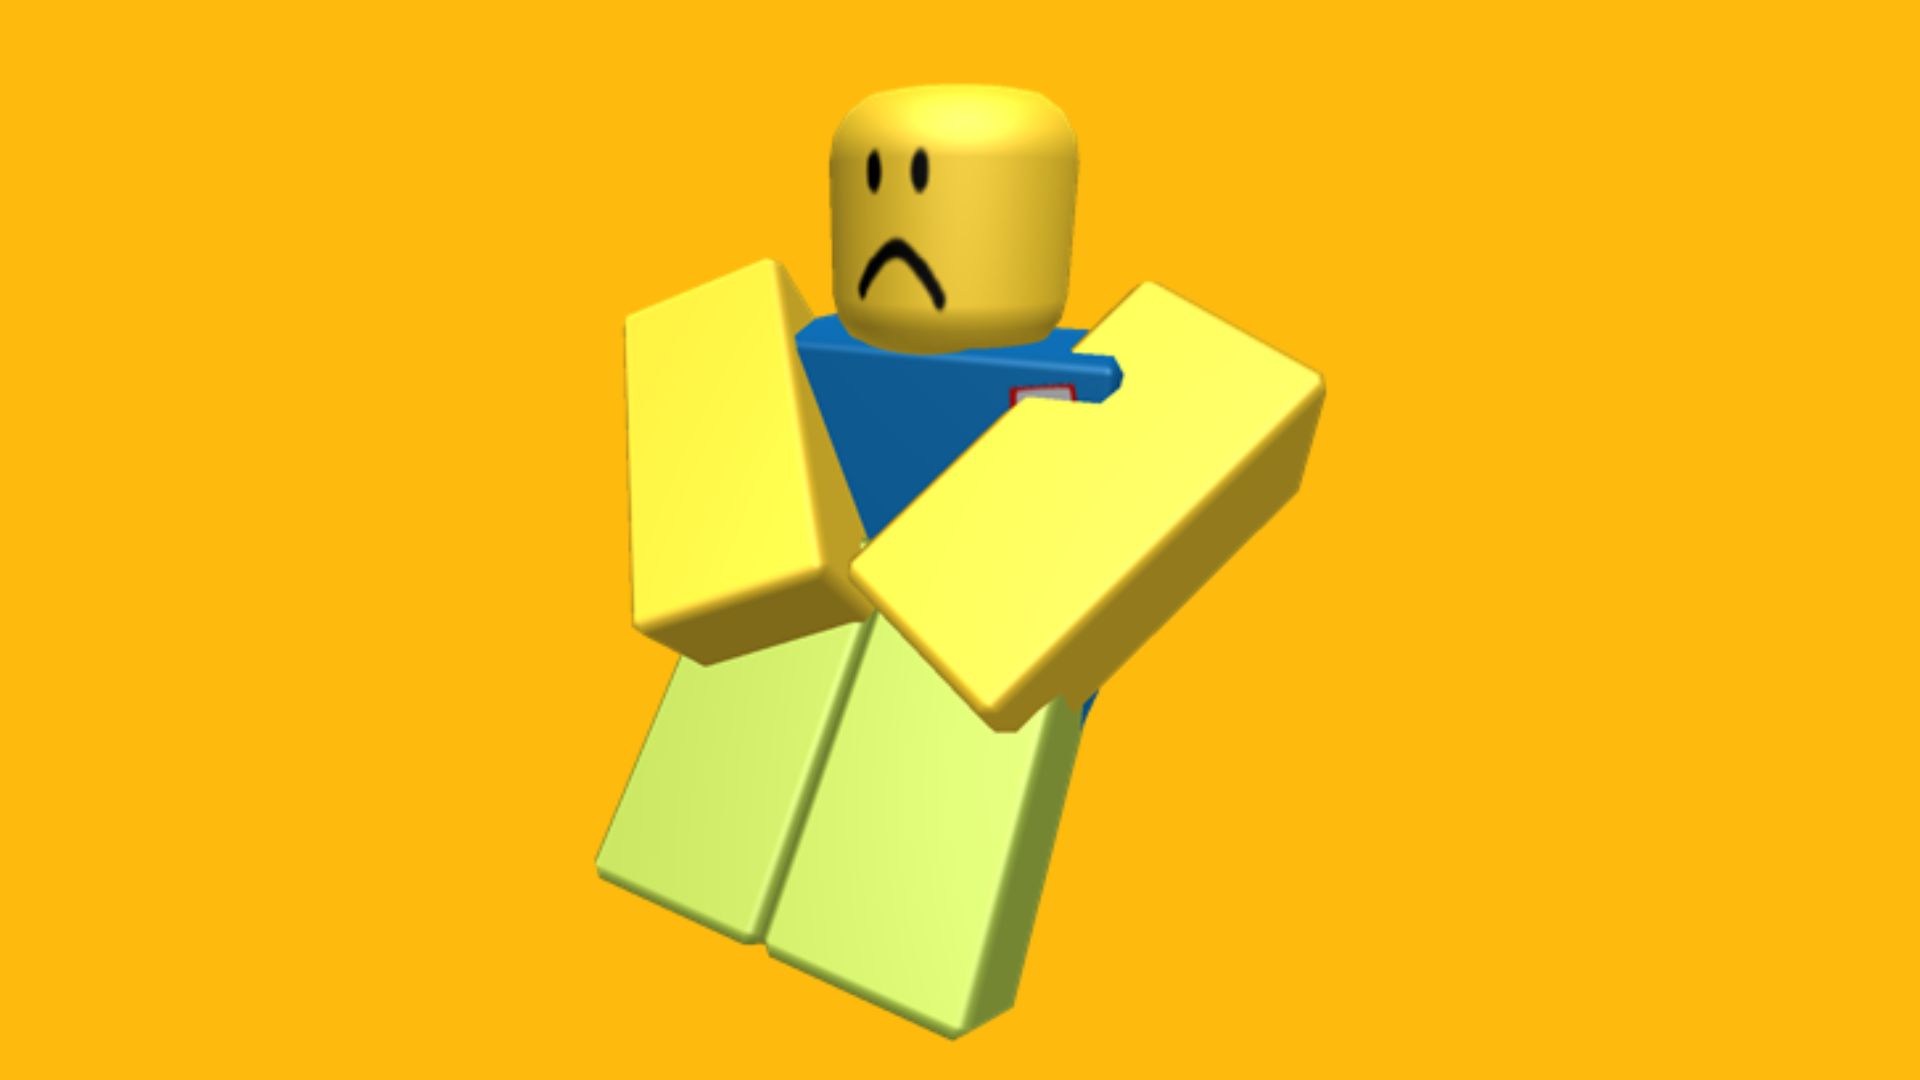 Roblox DOWN: Is Roblox down right now? Is Roblox shutting down